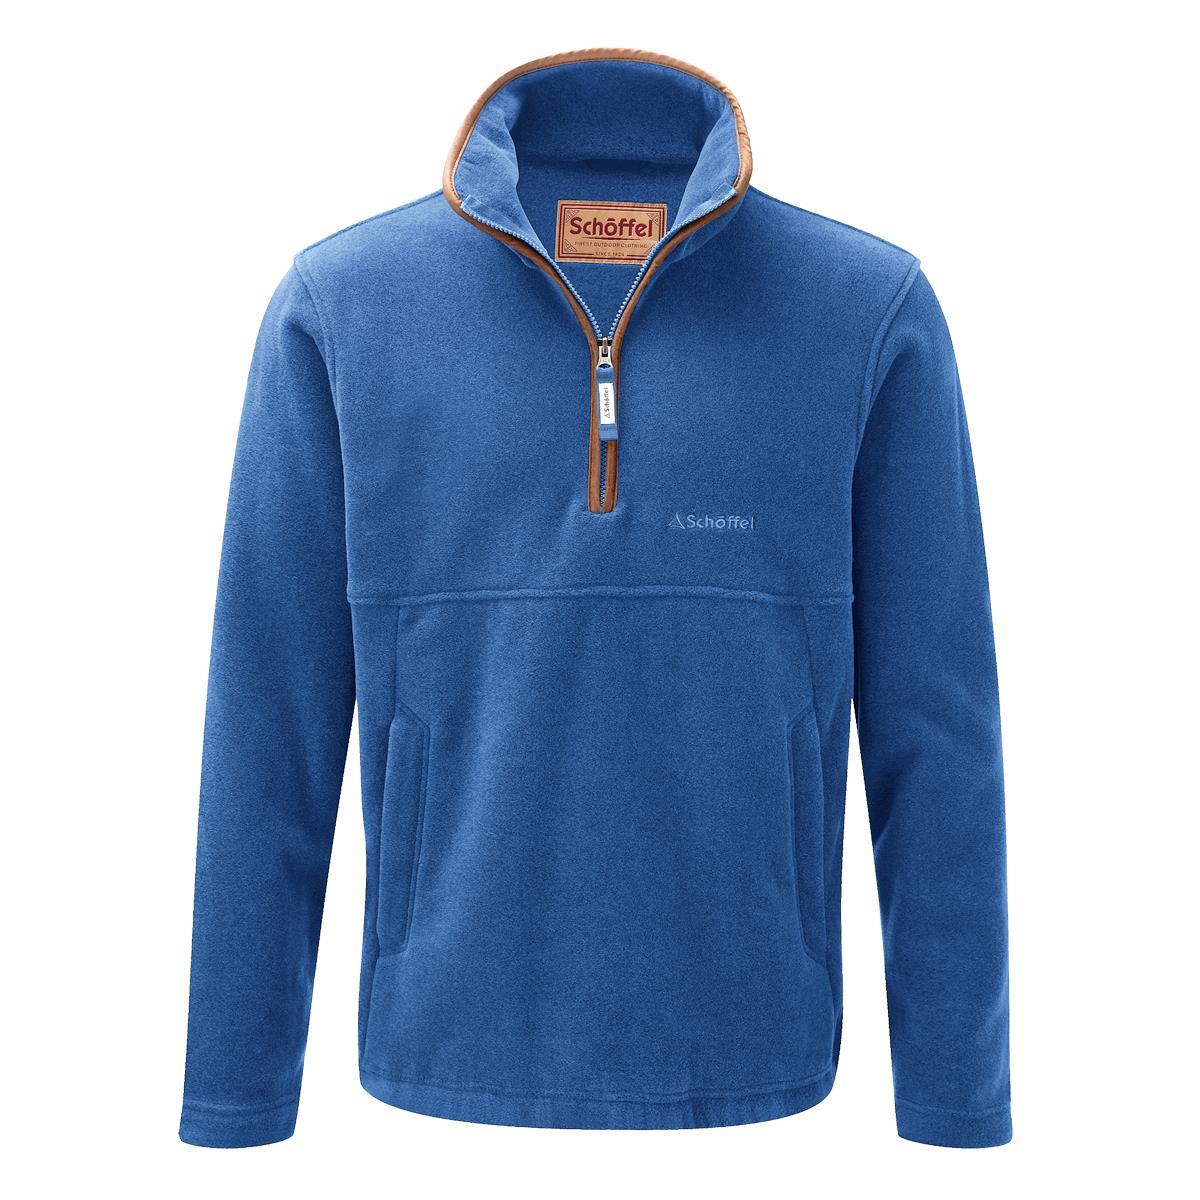 What are styling options for the Schoffel Berkeley quarter zip fleece?